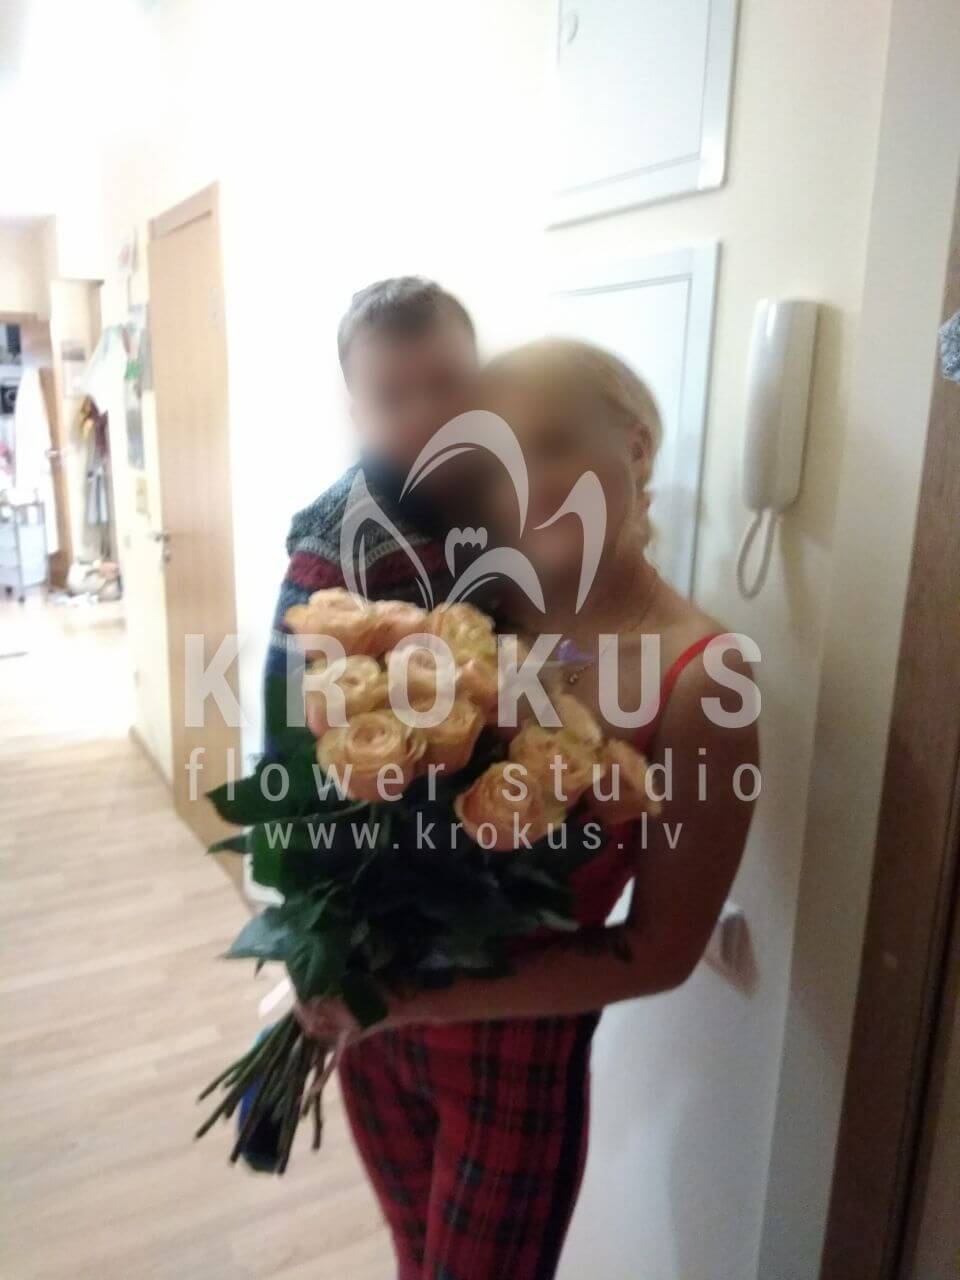 Deliver flowers to Rīga (peony roses)